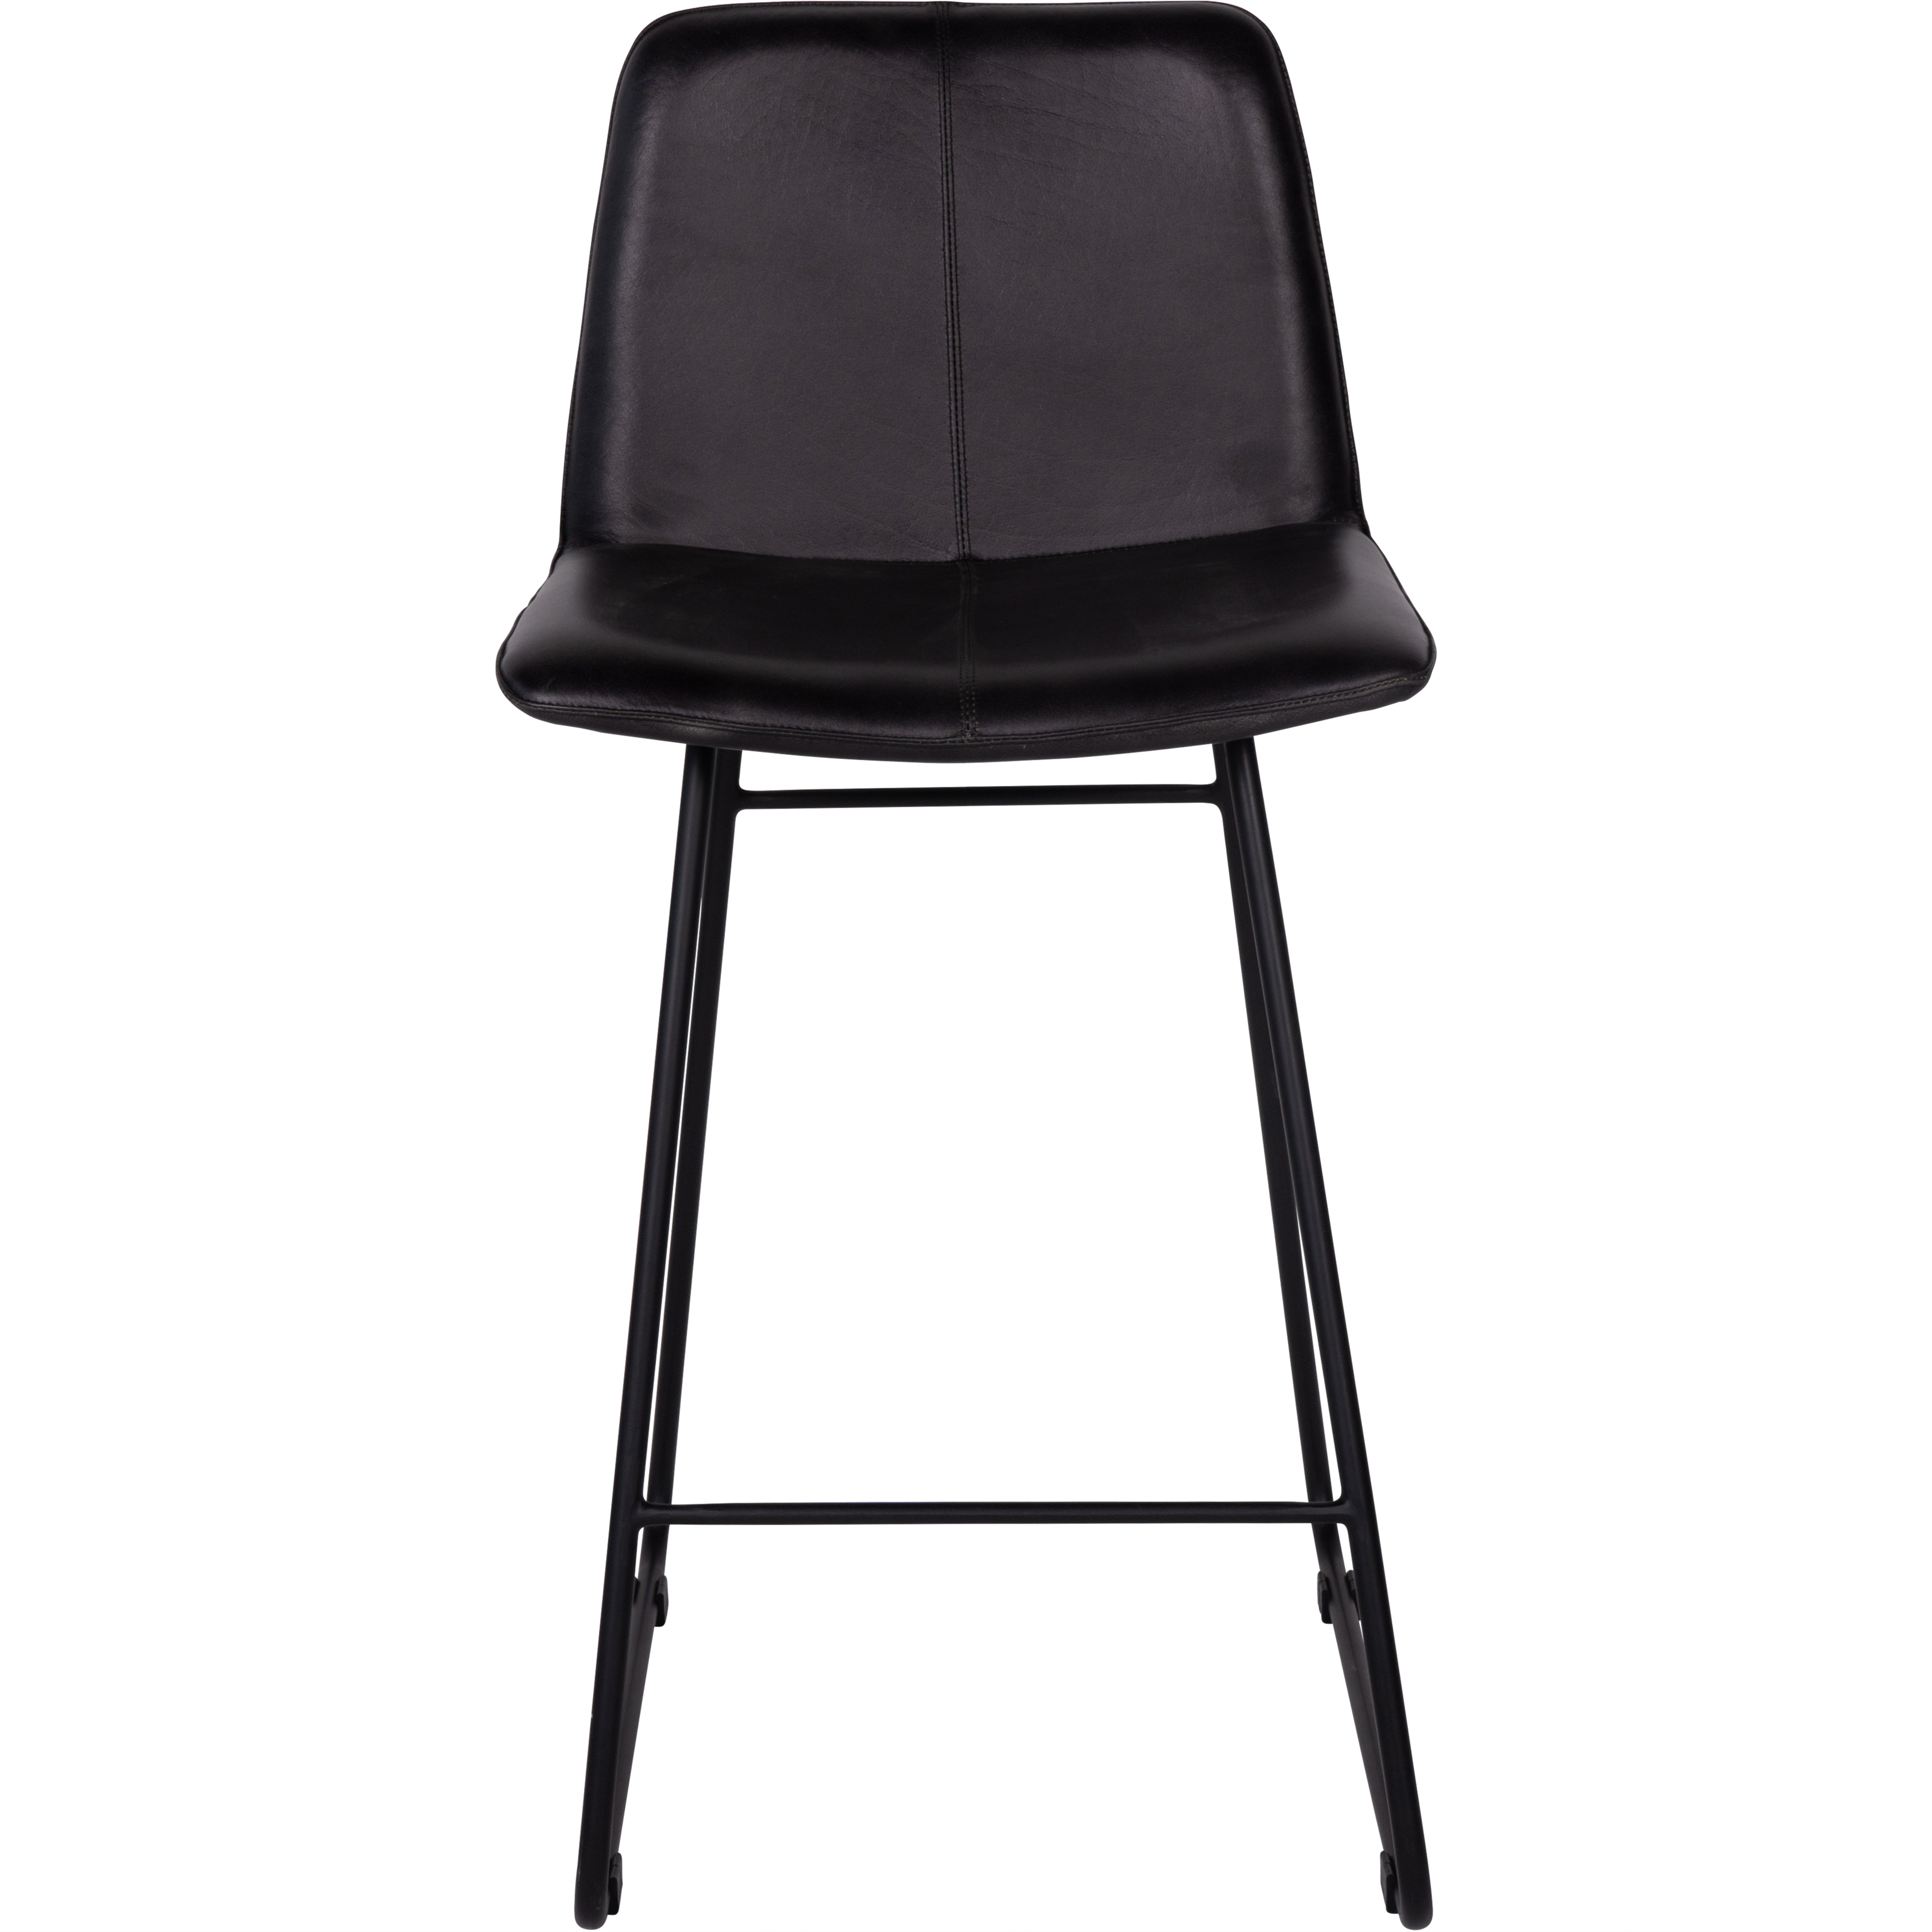 Set of 2 Baskin Leather Bar Stools in Charcoal